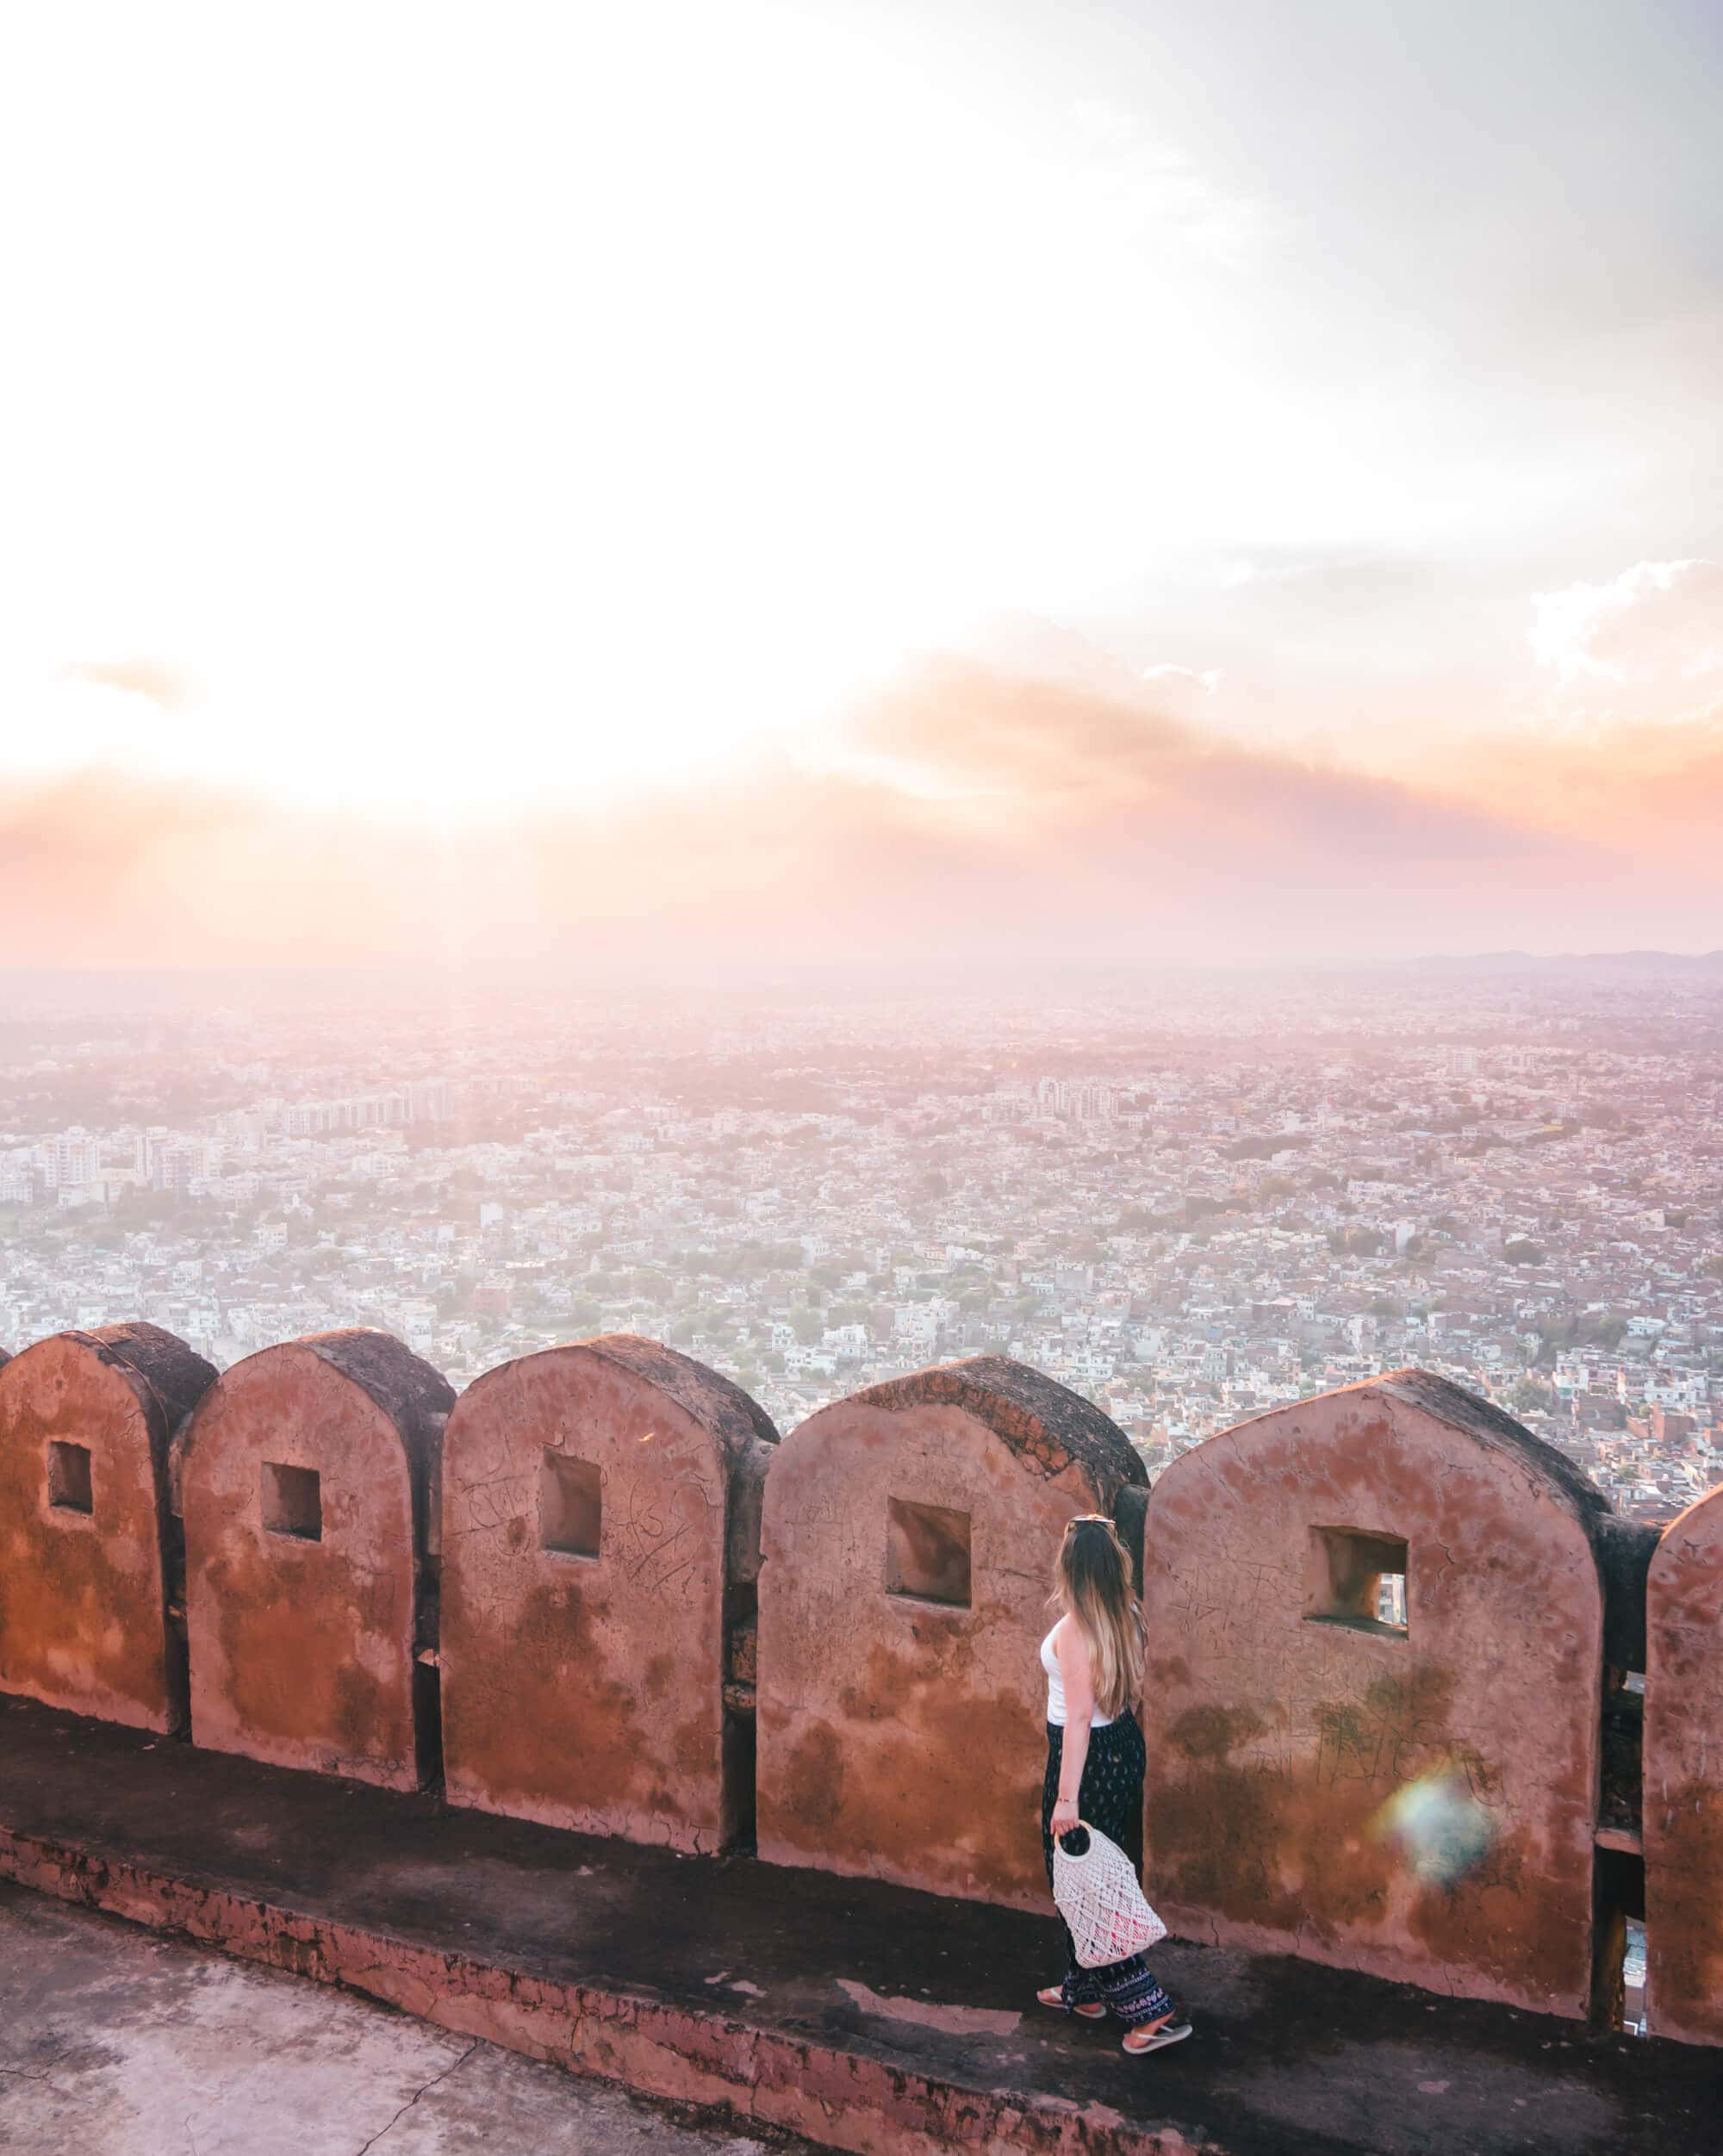 How to spend 2 days in Jaipur - sunset at Nahargarh Fort, one of the most Instagrammable places in the city